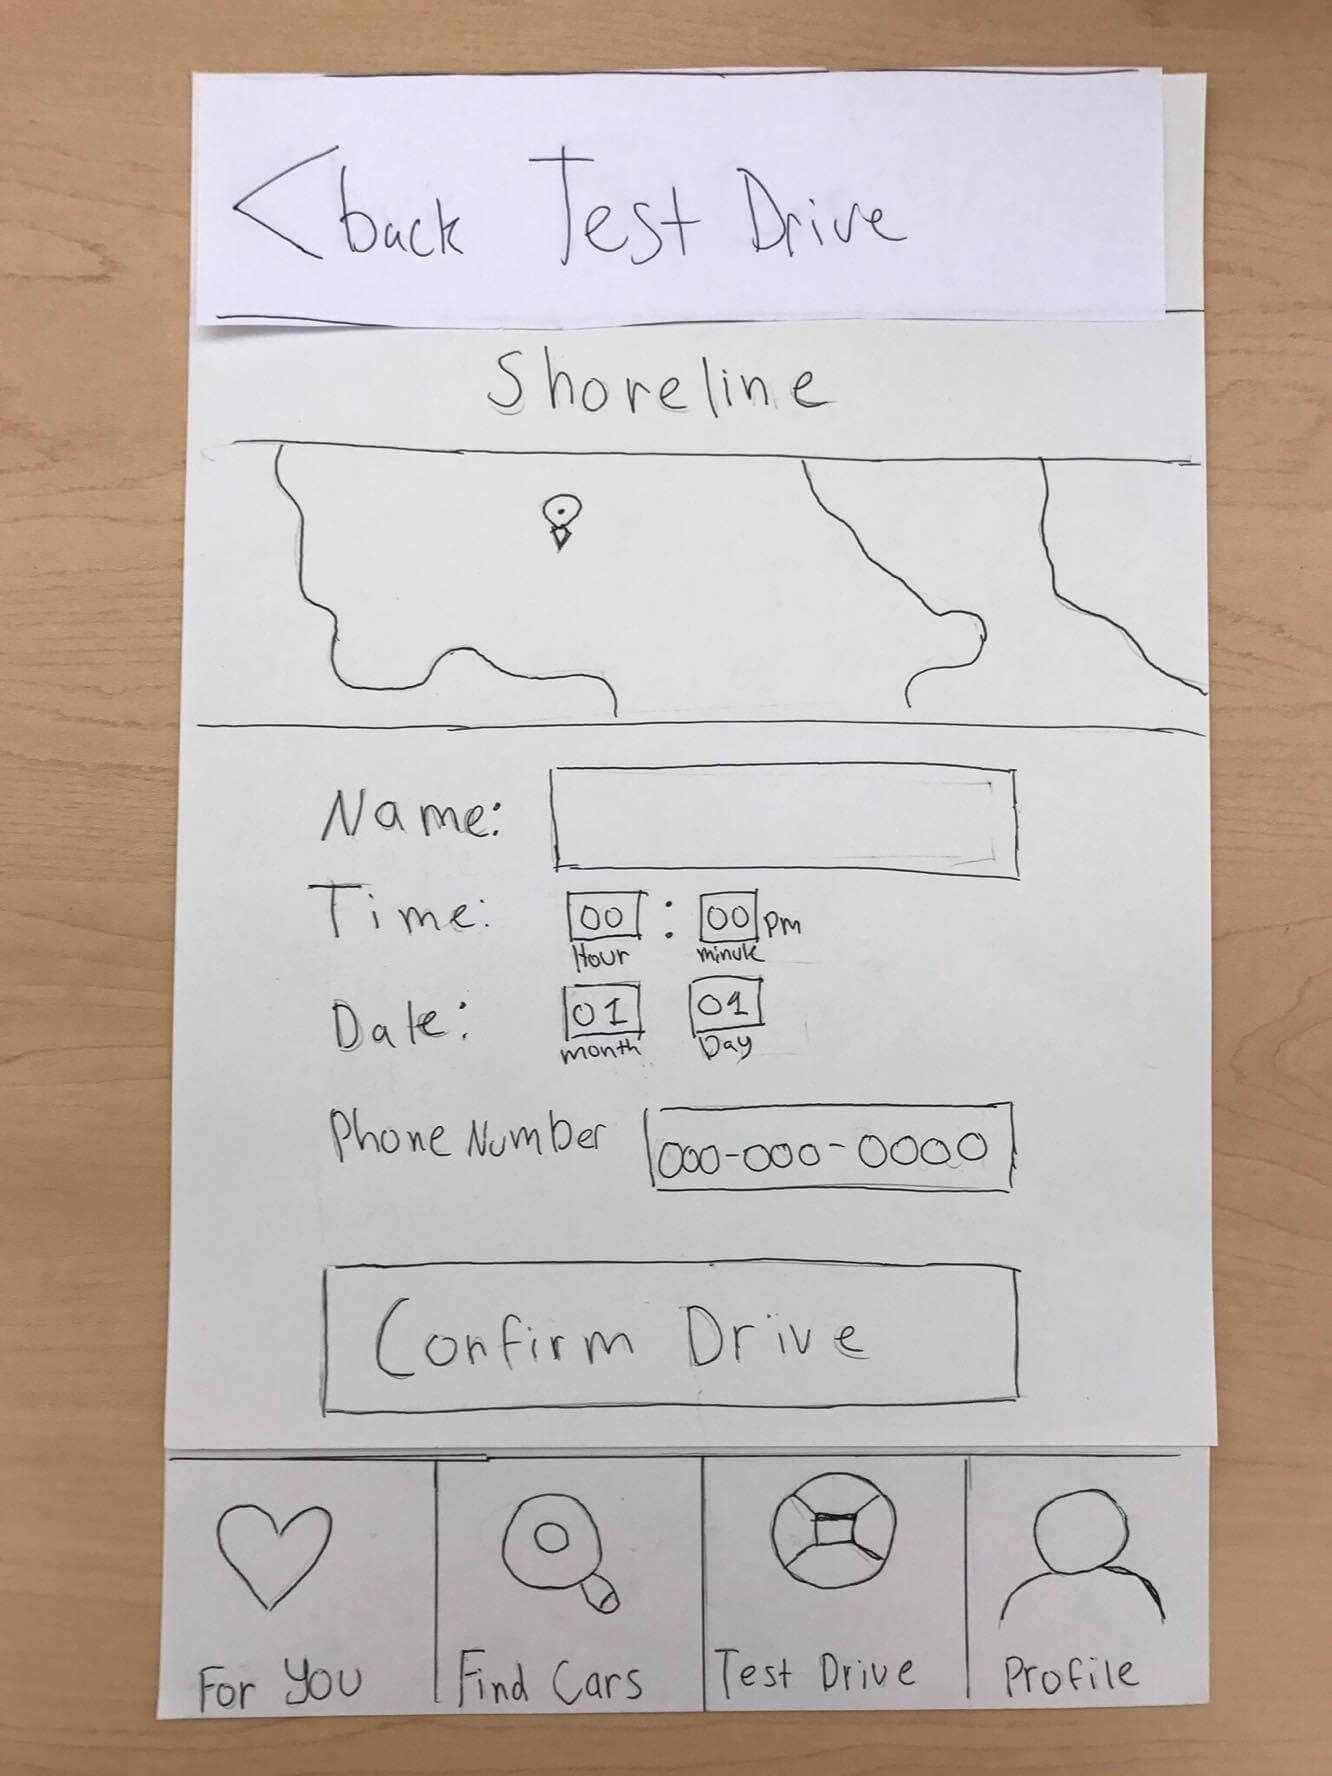 A sketch showing a screen from where a test drive can be scheduled